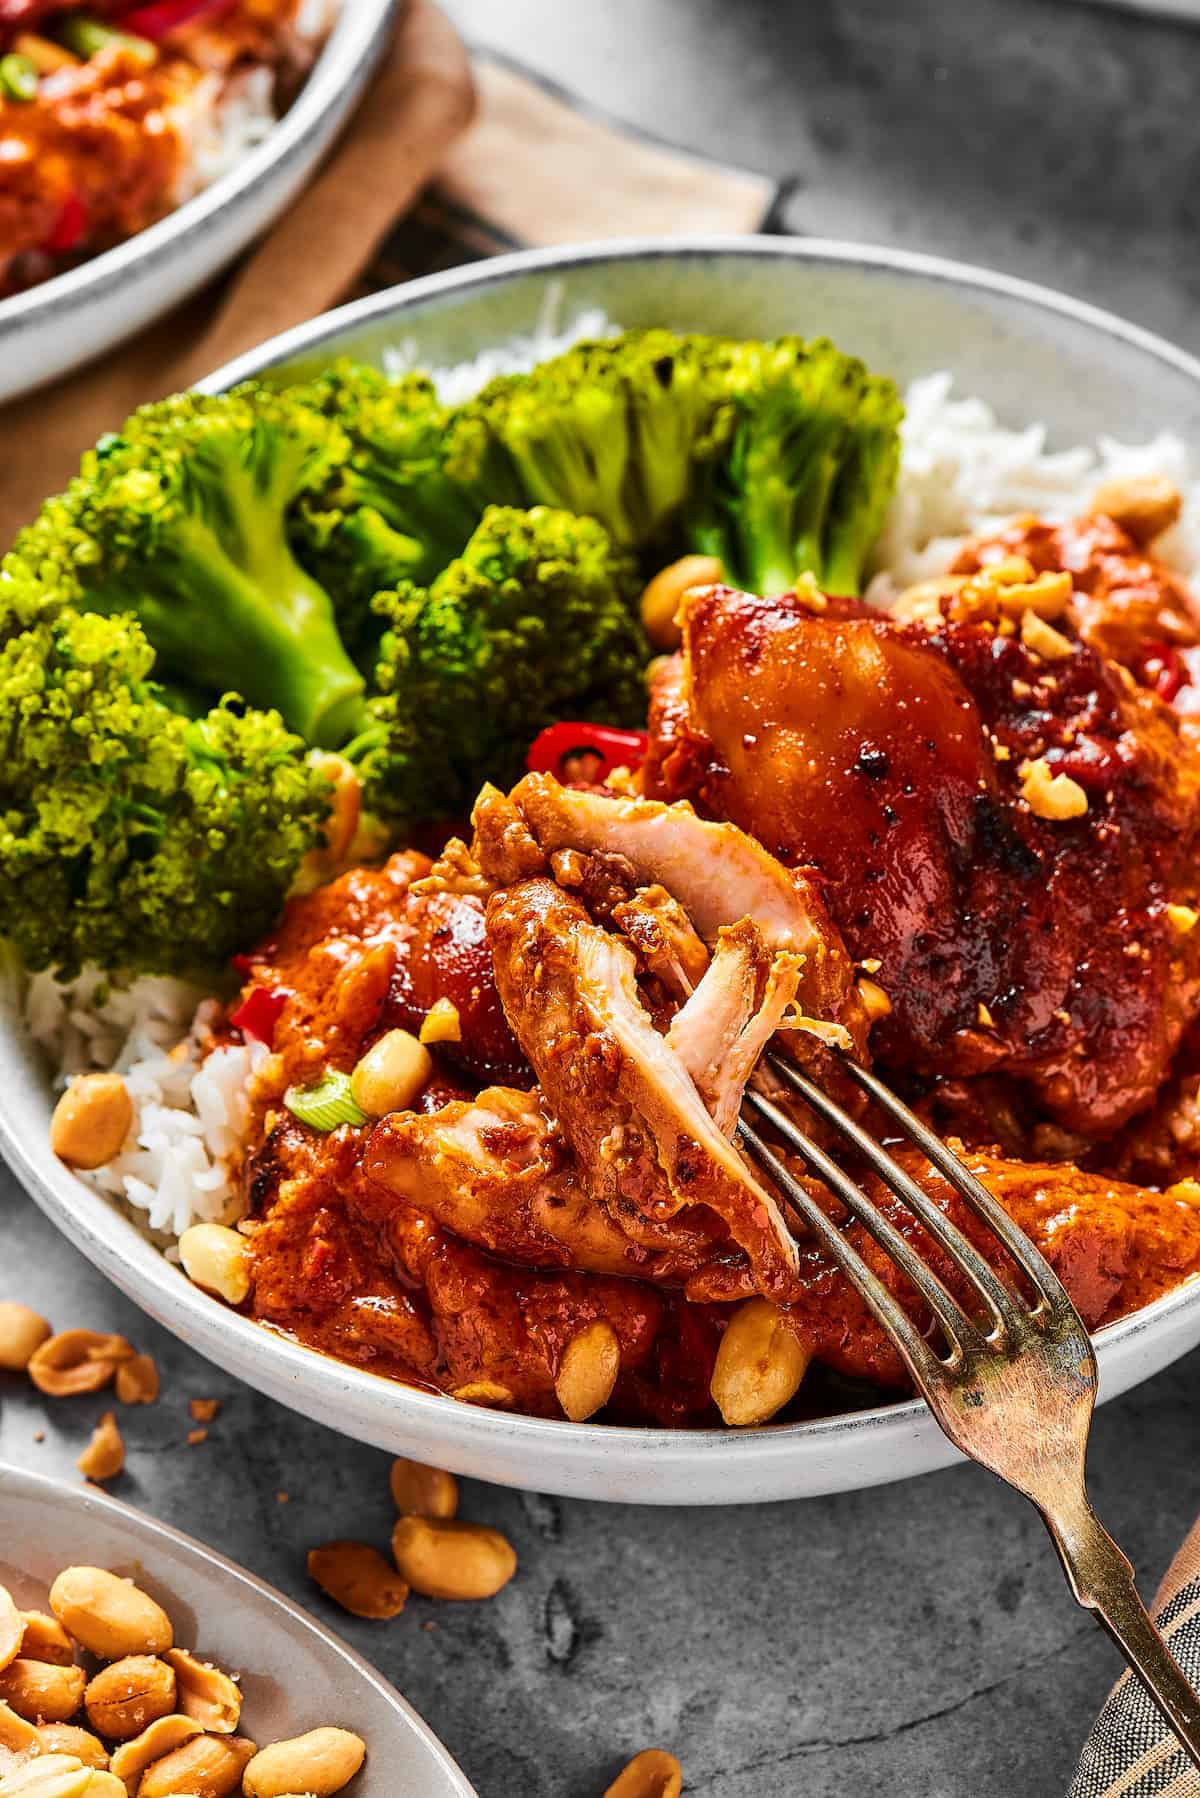 peanut butter chicken served on a plate with broccoli.